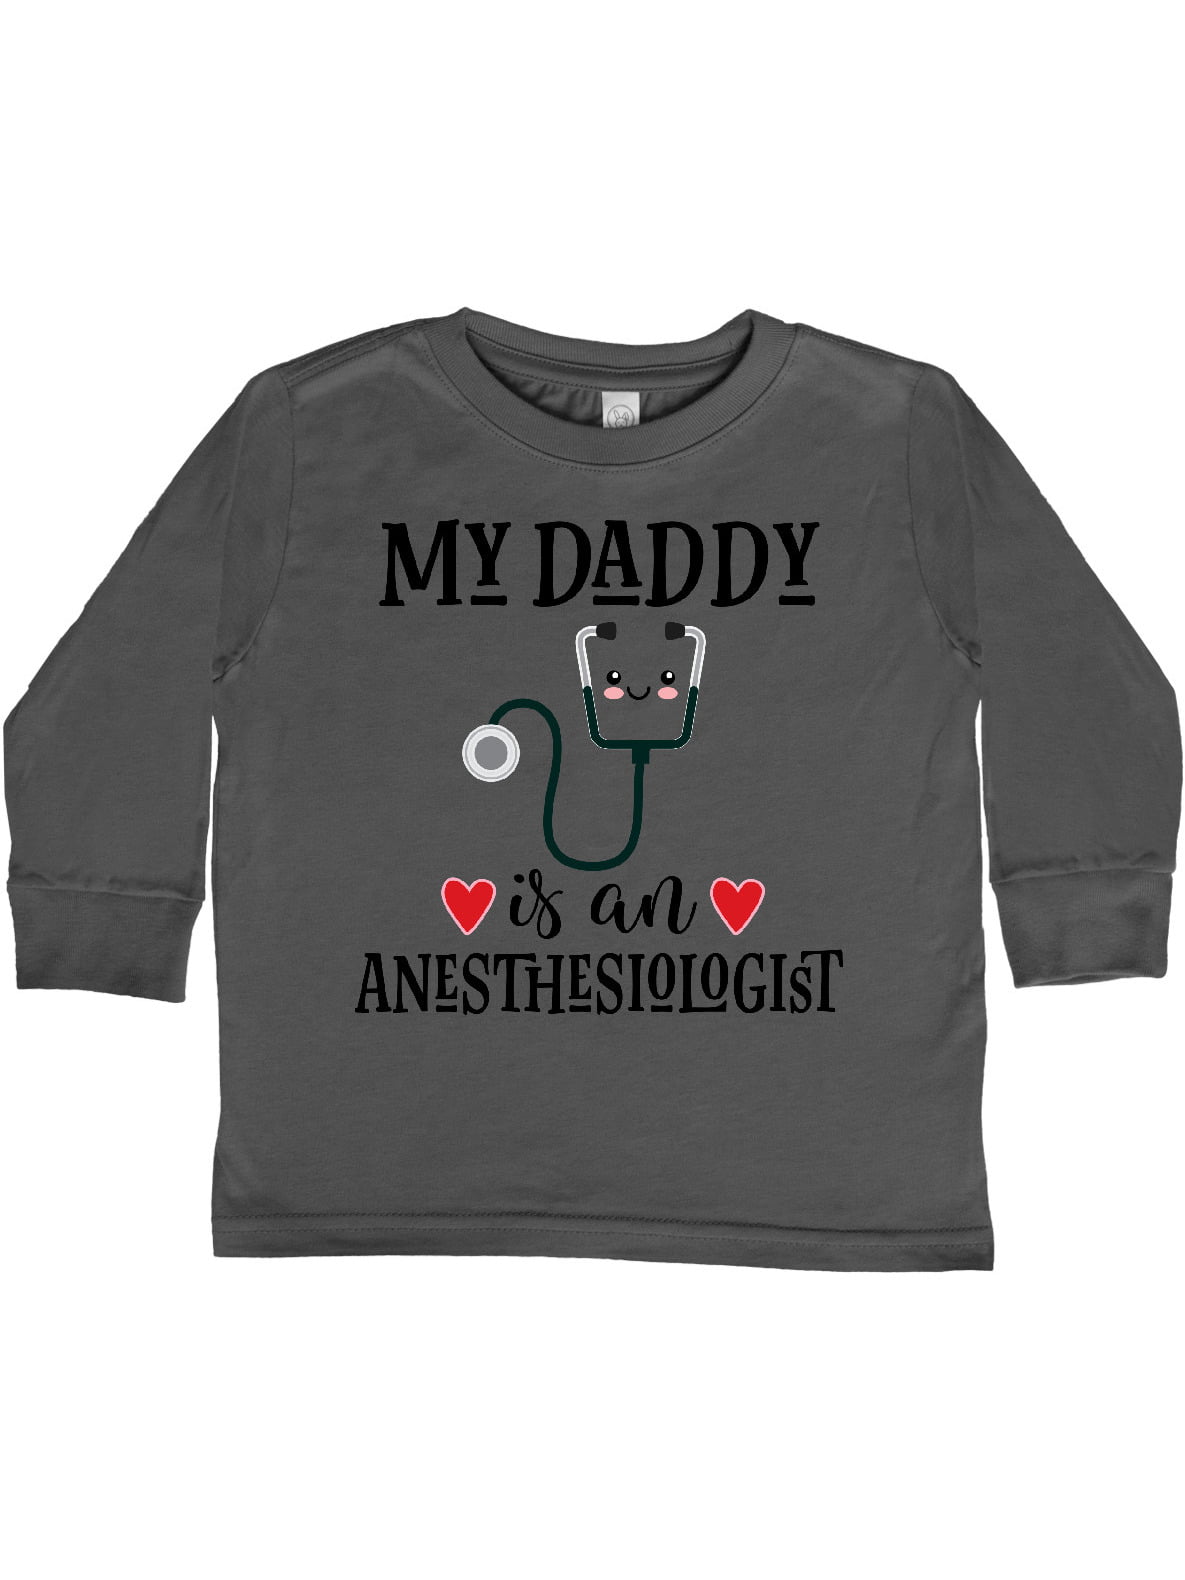 Smart Good Looking and Anesthesiologist Tee Shirt Long Sleeve Shirt